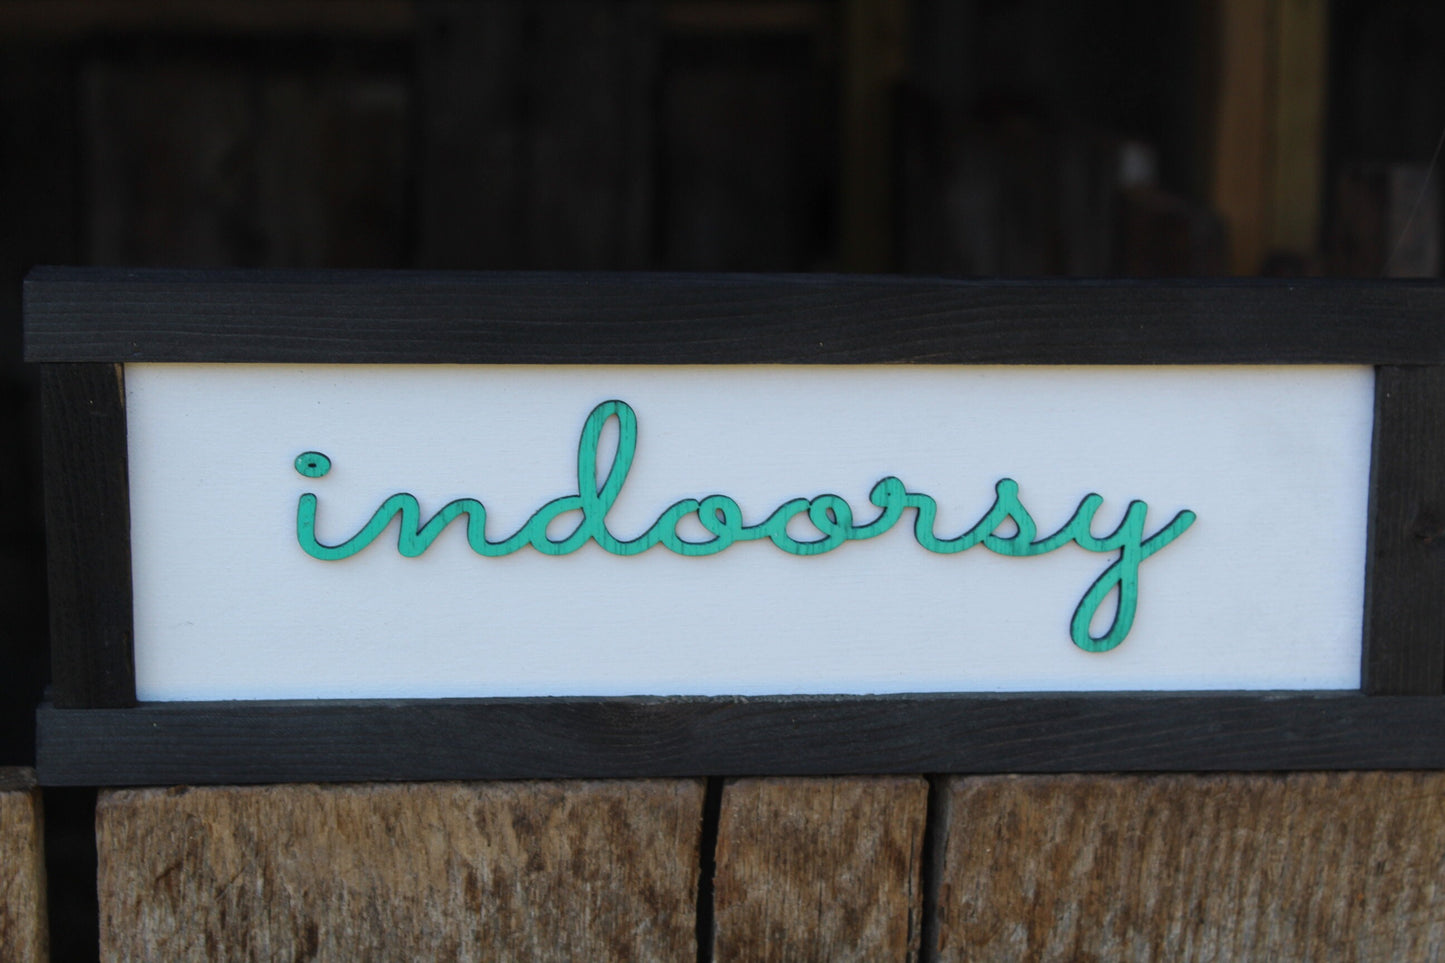 Indoorsy I Love Inside Hate Outdoors Wood Sign Raised Text Wall Hanging Decoration Hates Camping Primitive Rustic  In Doors Gift Decor